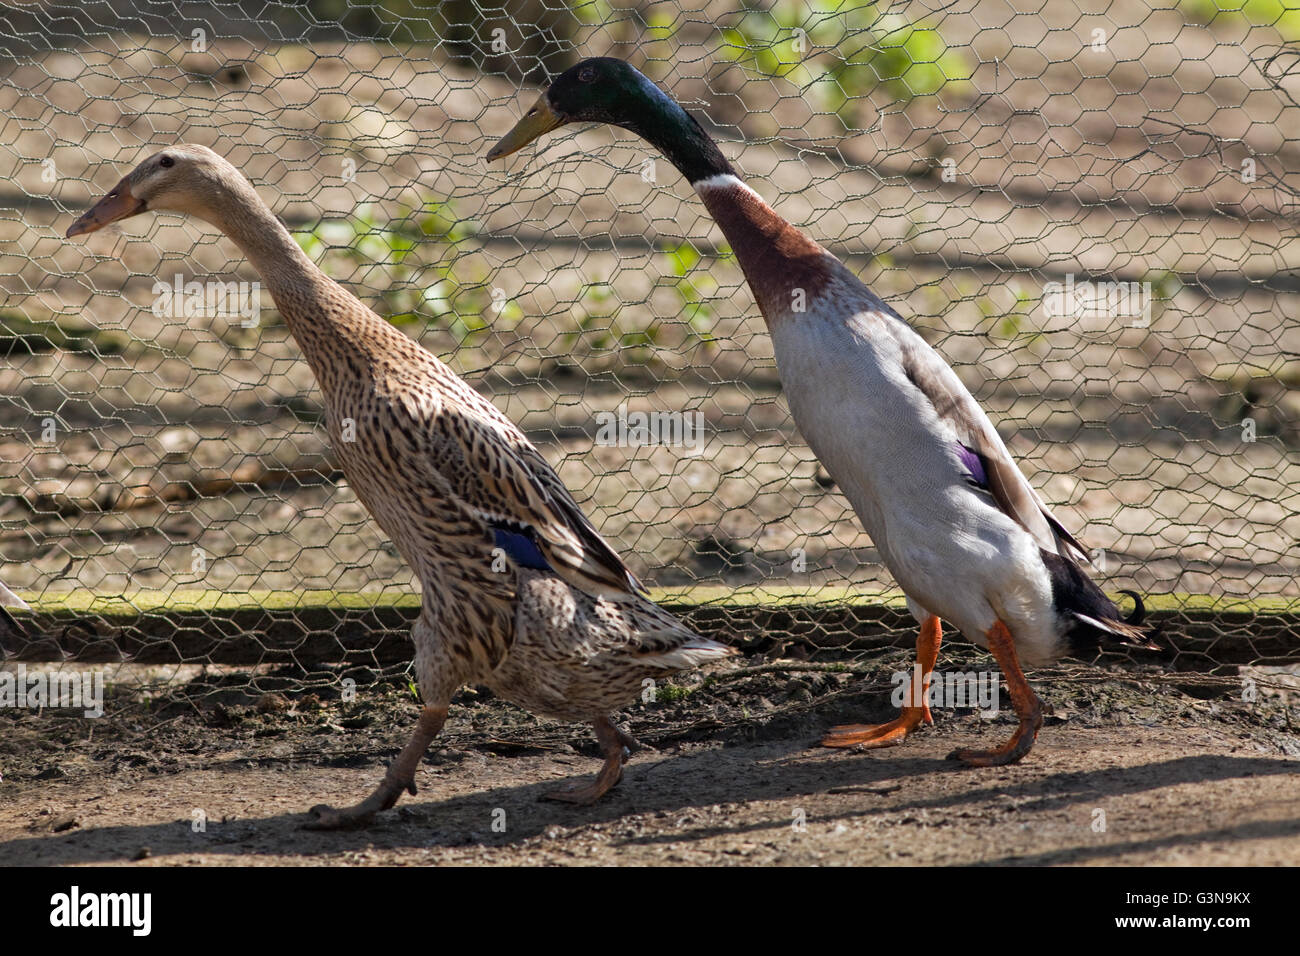 Indian Runner Ducks (Anas platyrhynchos). Trout colour variety. Domestic, egg laying breed derived from the wild Mallard. Stock Photo